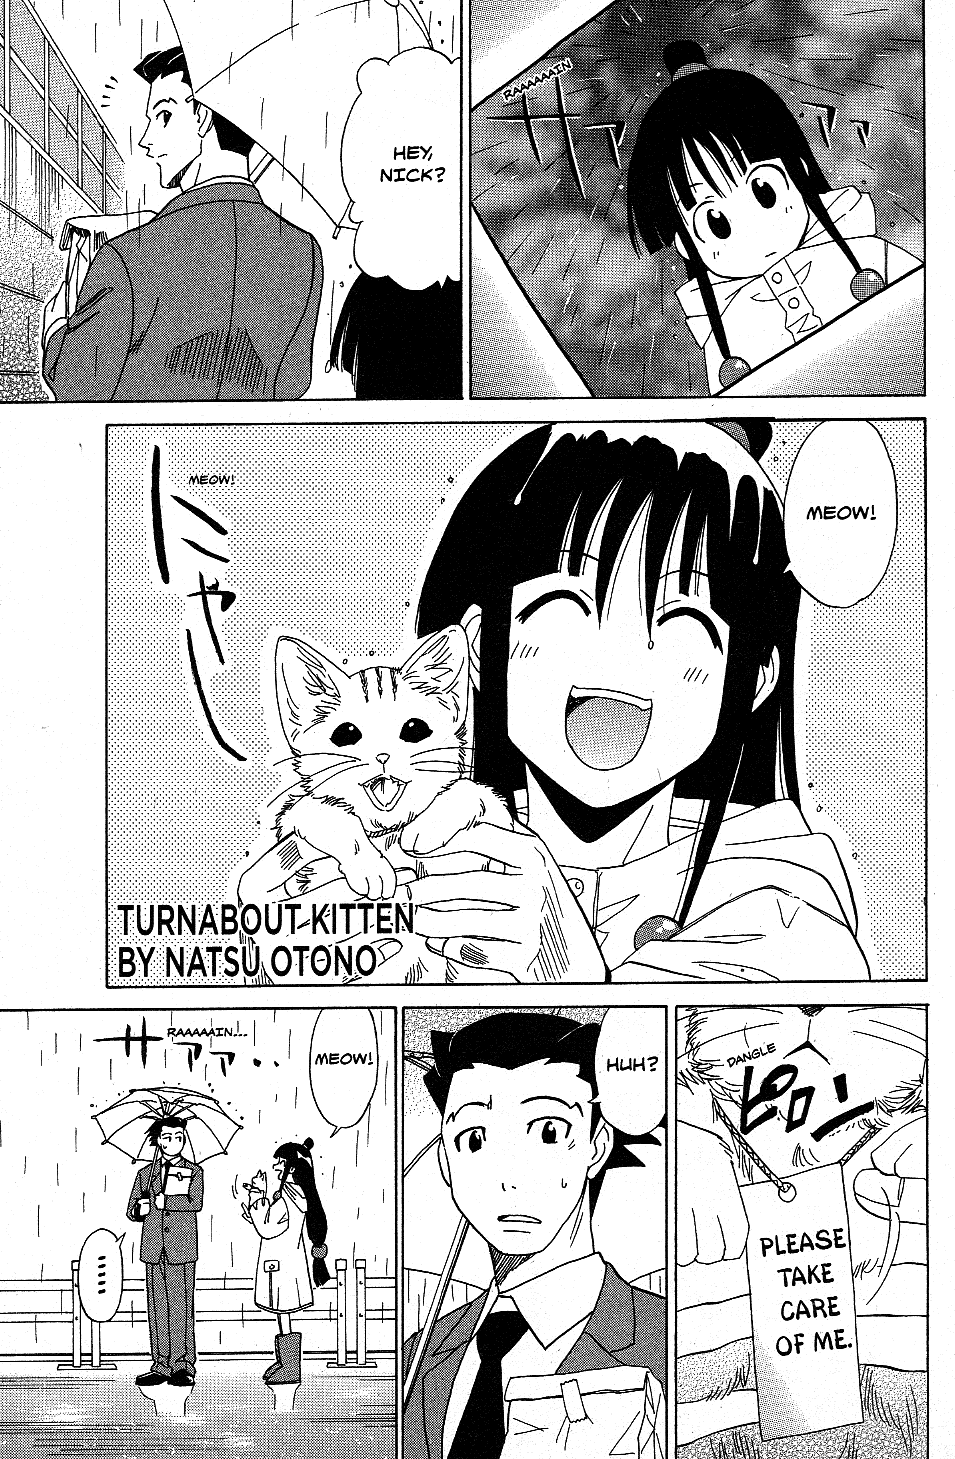 Phoenix Wright: Ace Attorney - Official Casebook Vol.1 Chapter 9: Turnabout Kitten - By Natsu Otono - Picture 3